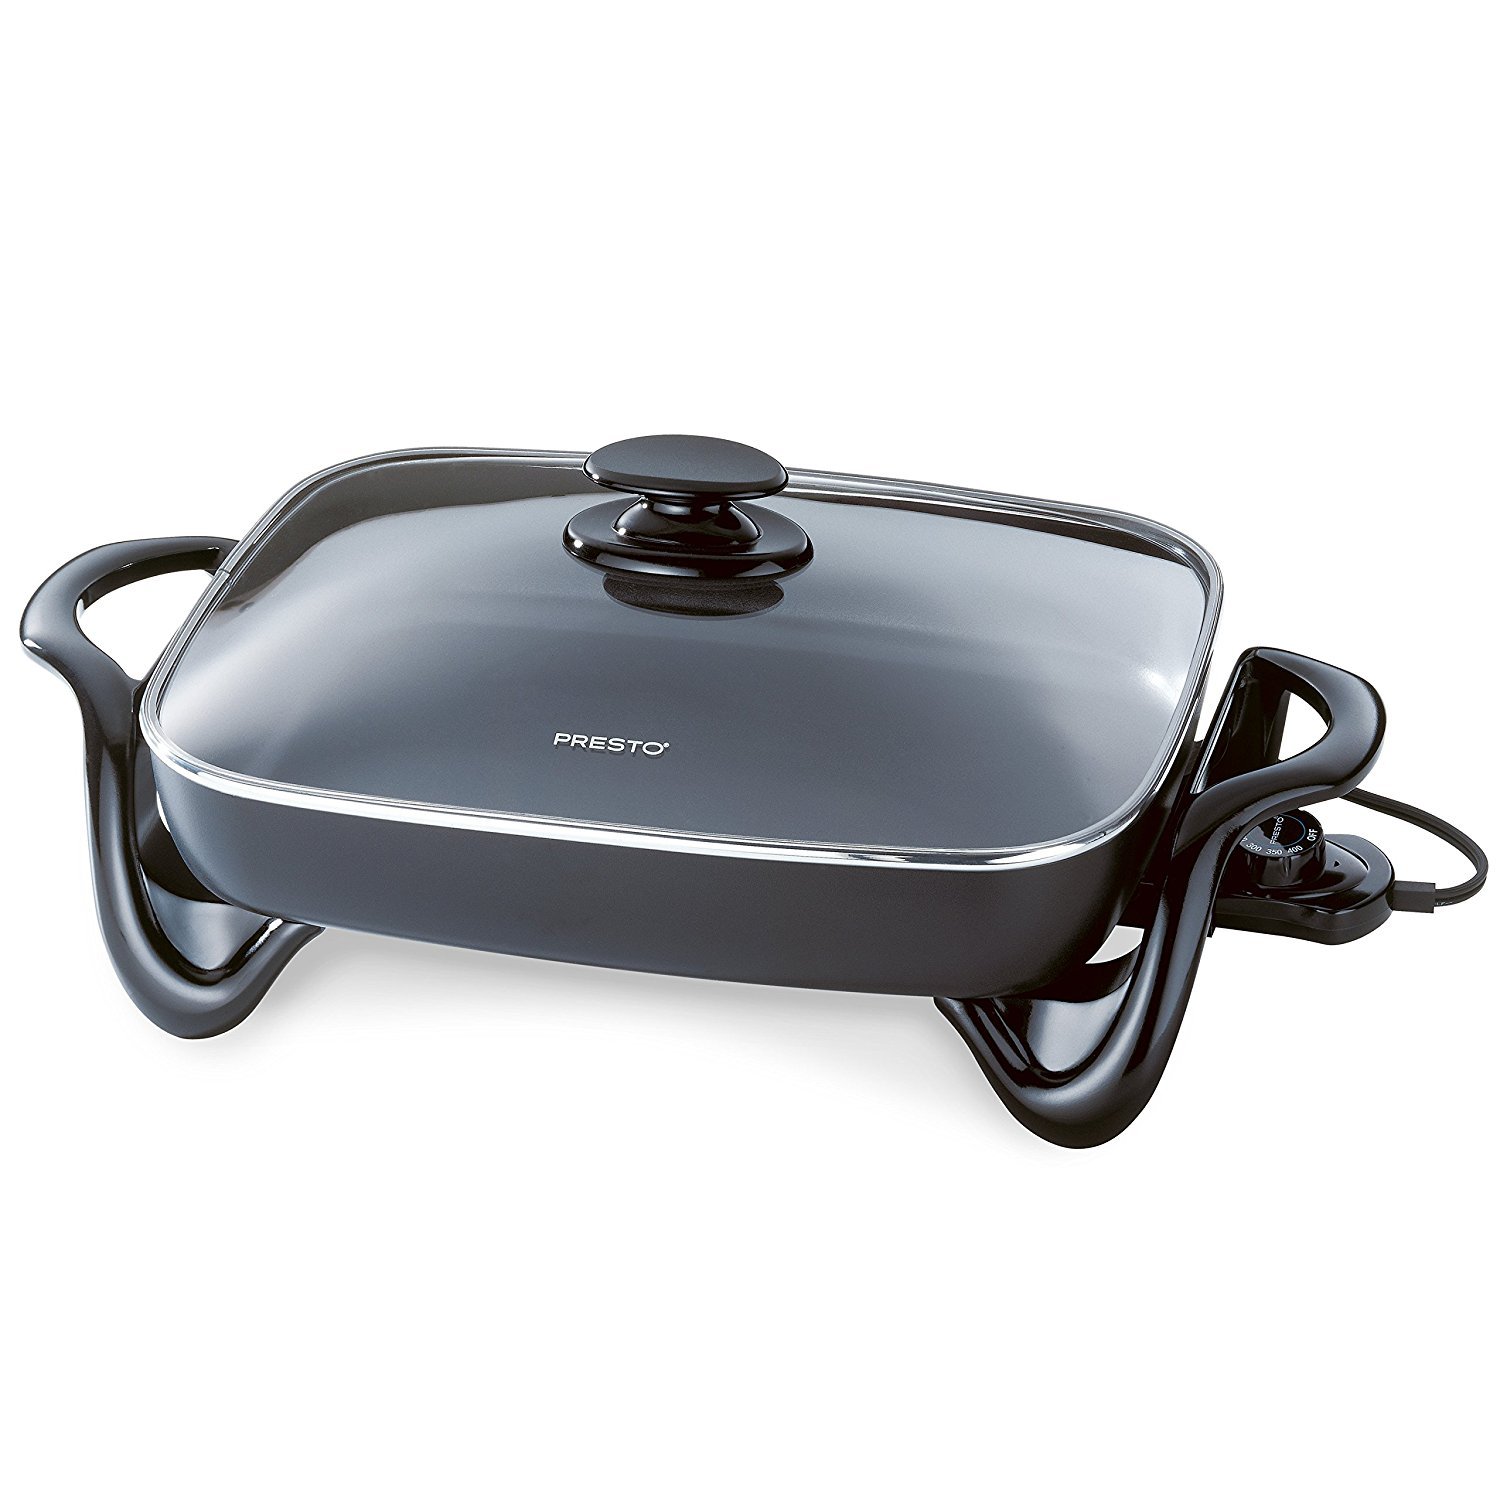 Buy Presto 06852 16-Inch Best Electric Skillet with Glass Cover